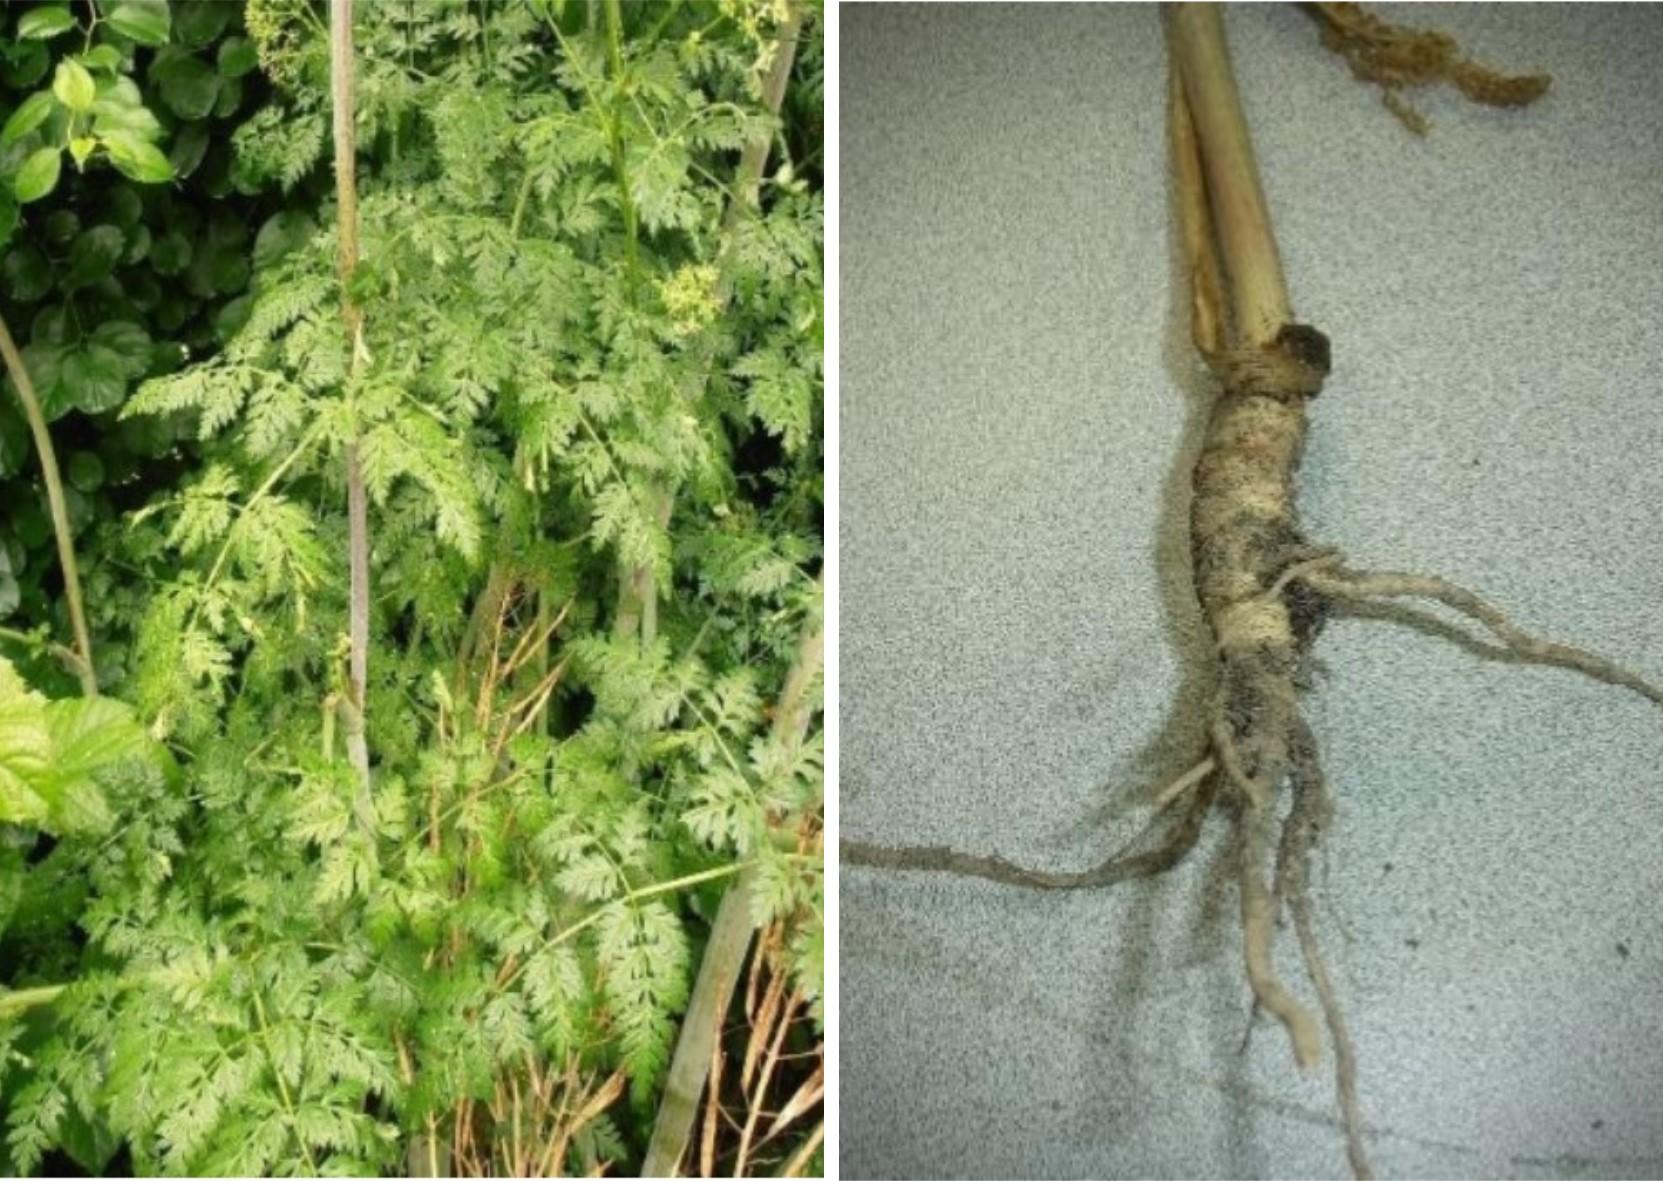 Figure 3. Pinnate compound leaf (left) and taproot (right) of poison hemlock.